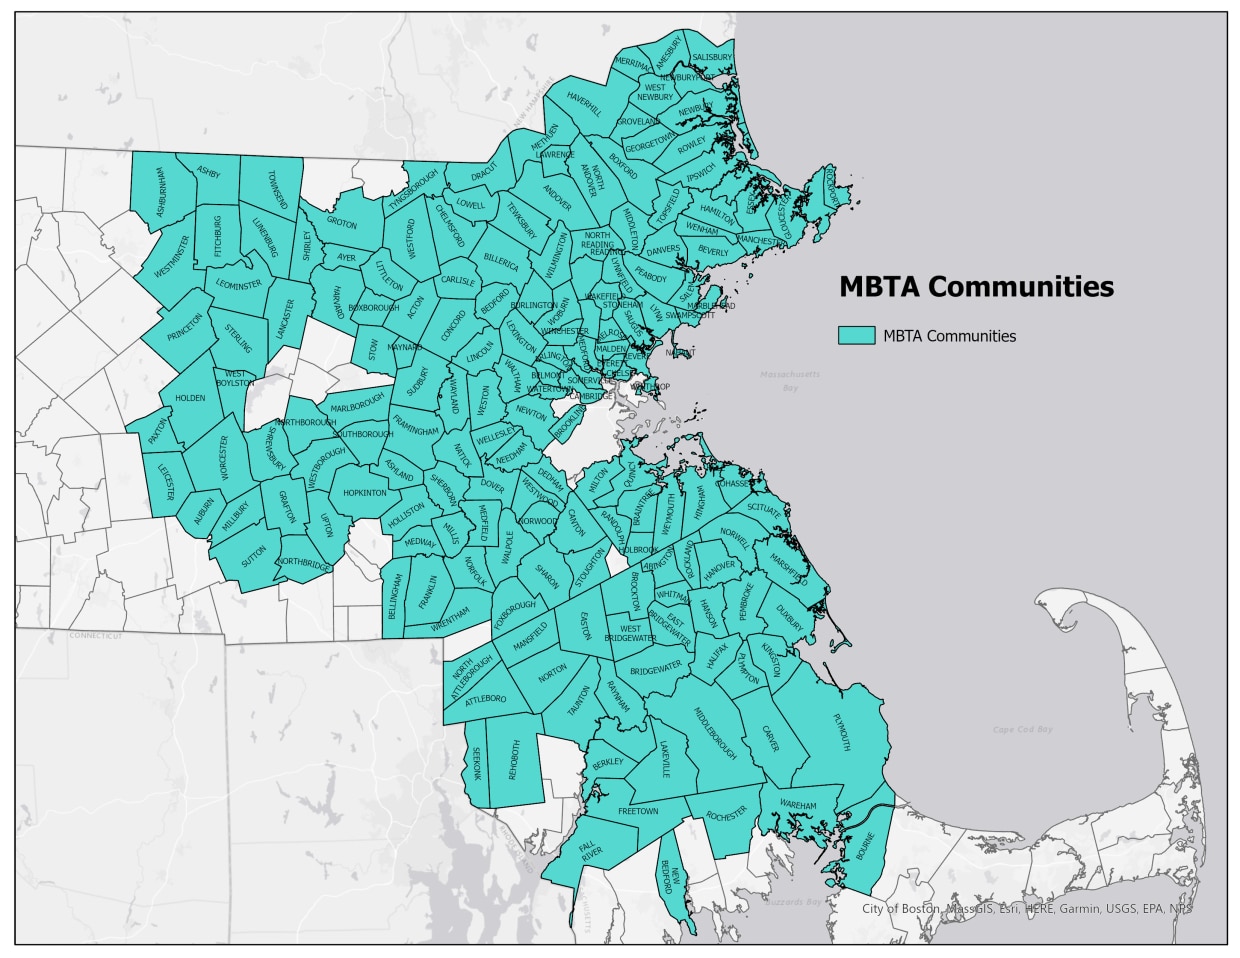 Map of all 177 MBTA communities as defined in Section 1 of MGL c. 161A